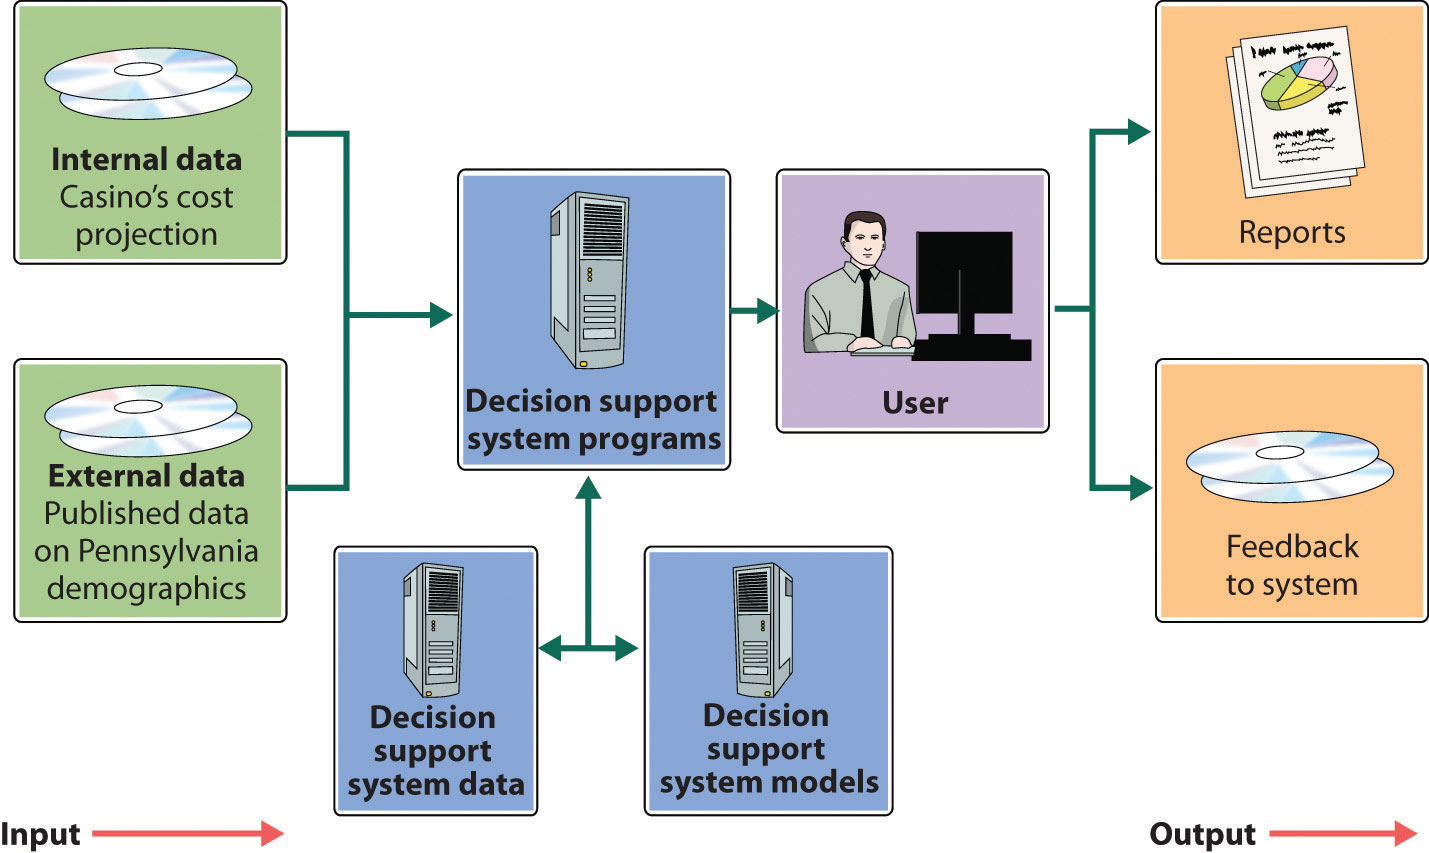 Internal data: Casino's cost projection. External data: Published data on Pennsylvania demographic. Both groups go to Decision support system programs. This is broken into Decision support system data and Decision support system models. Then, the user outputs reports and Feedback to system.